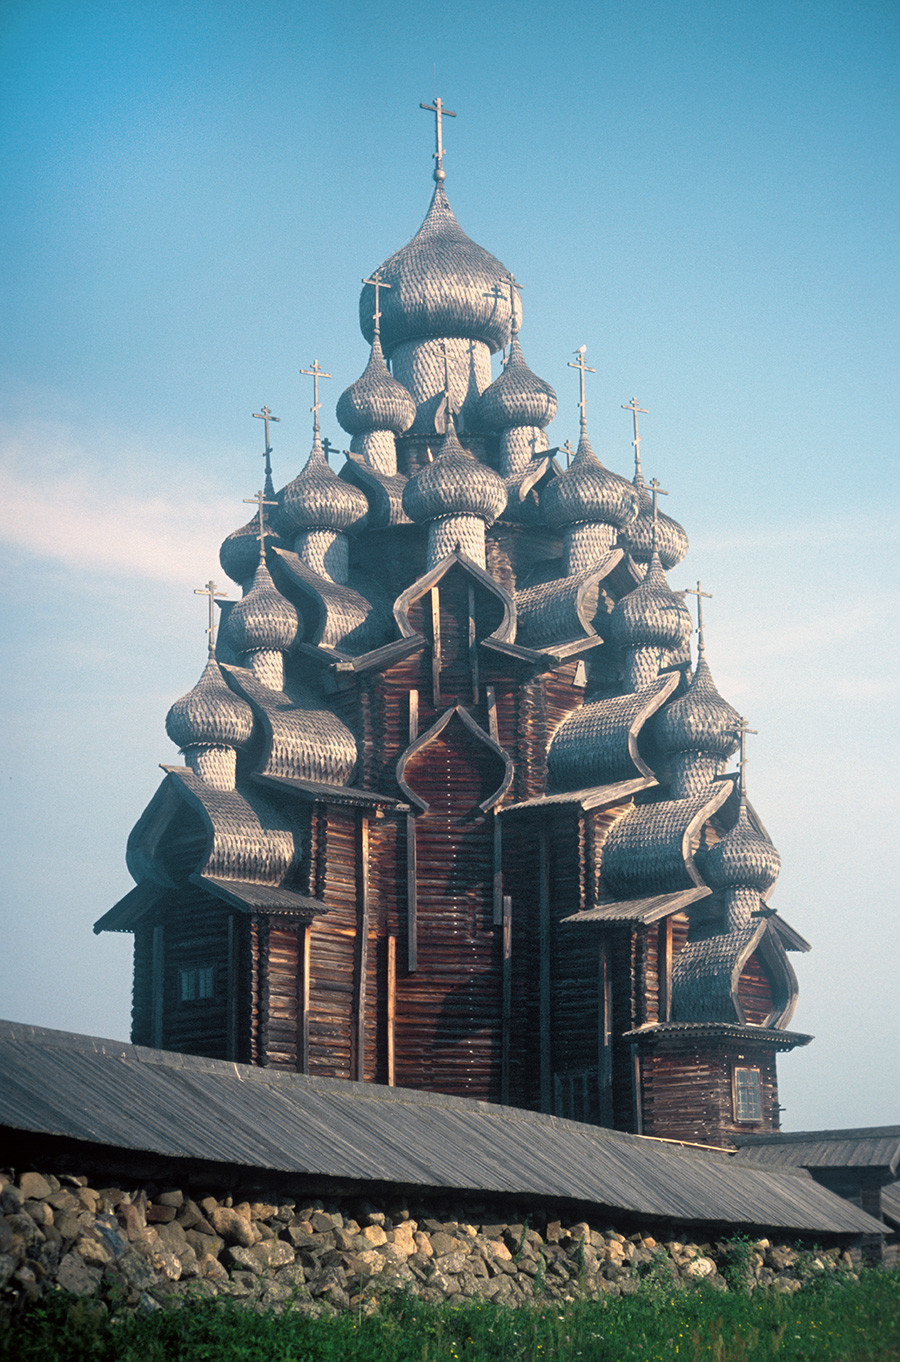 The Pleasure of Domes: Russia's towering wooden shrines - Russia Beyond